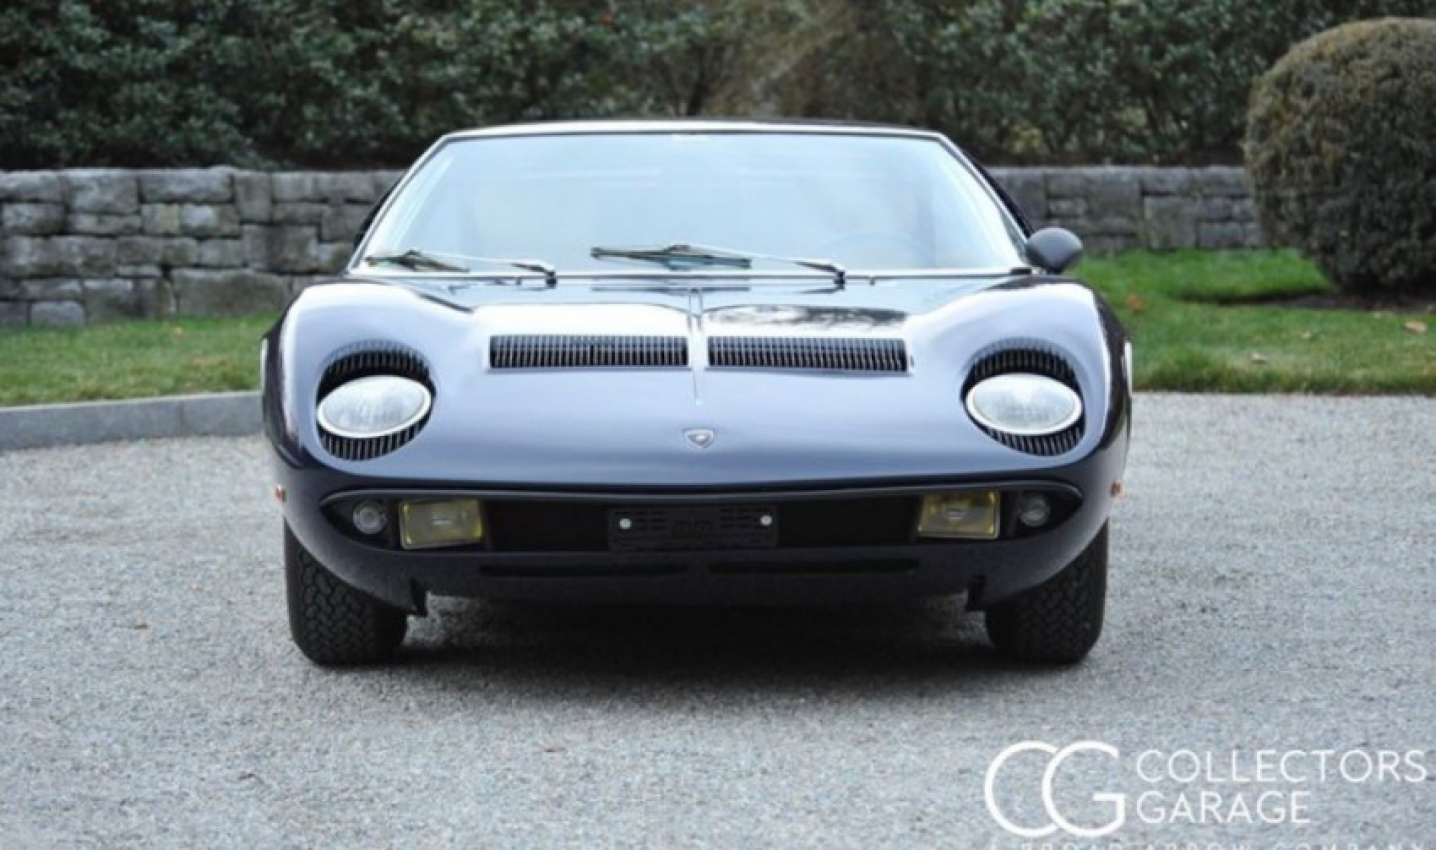 autos, cars, hypercar, lamborghini, american, asian, celebrity, classic, client, europe, exotic, features, handpicked, hotrods, luxury, modern classic, muscle, news, newsletter, off-road, sports, supercar, trucks, 1968 lamborghini miura shows the world what a real supercar looks like